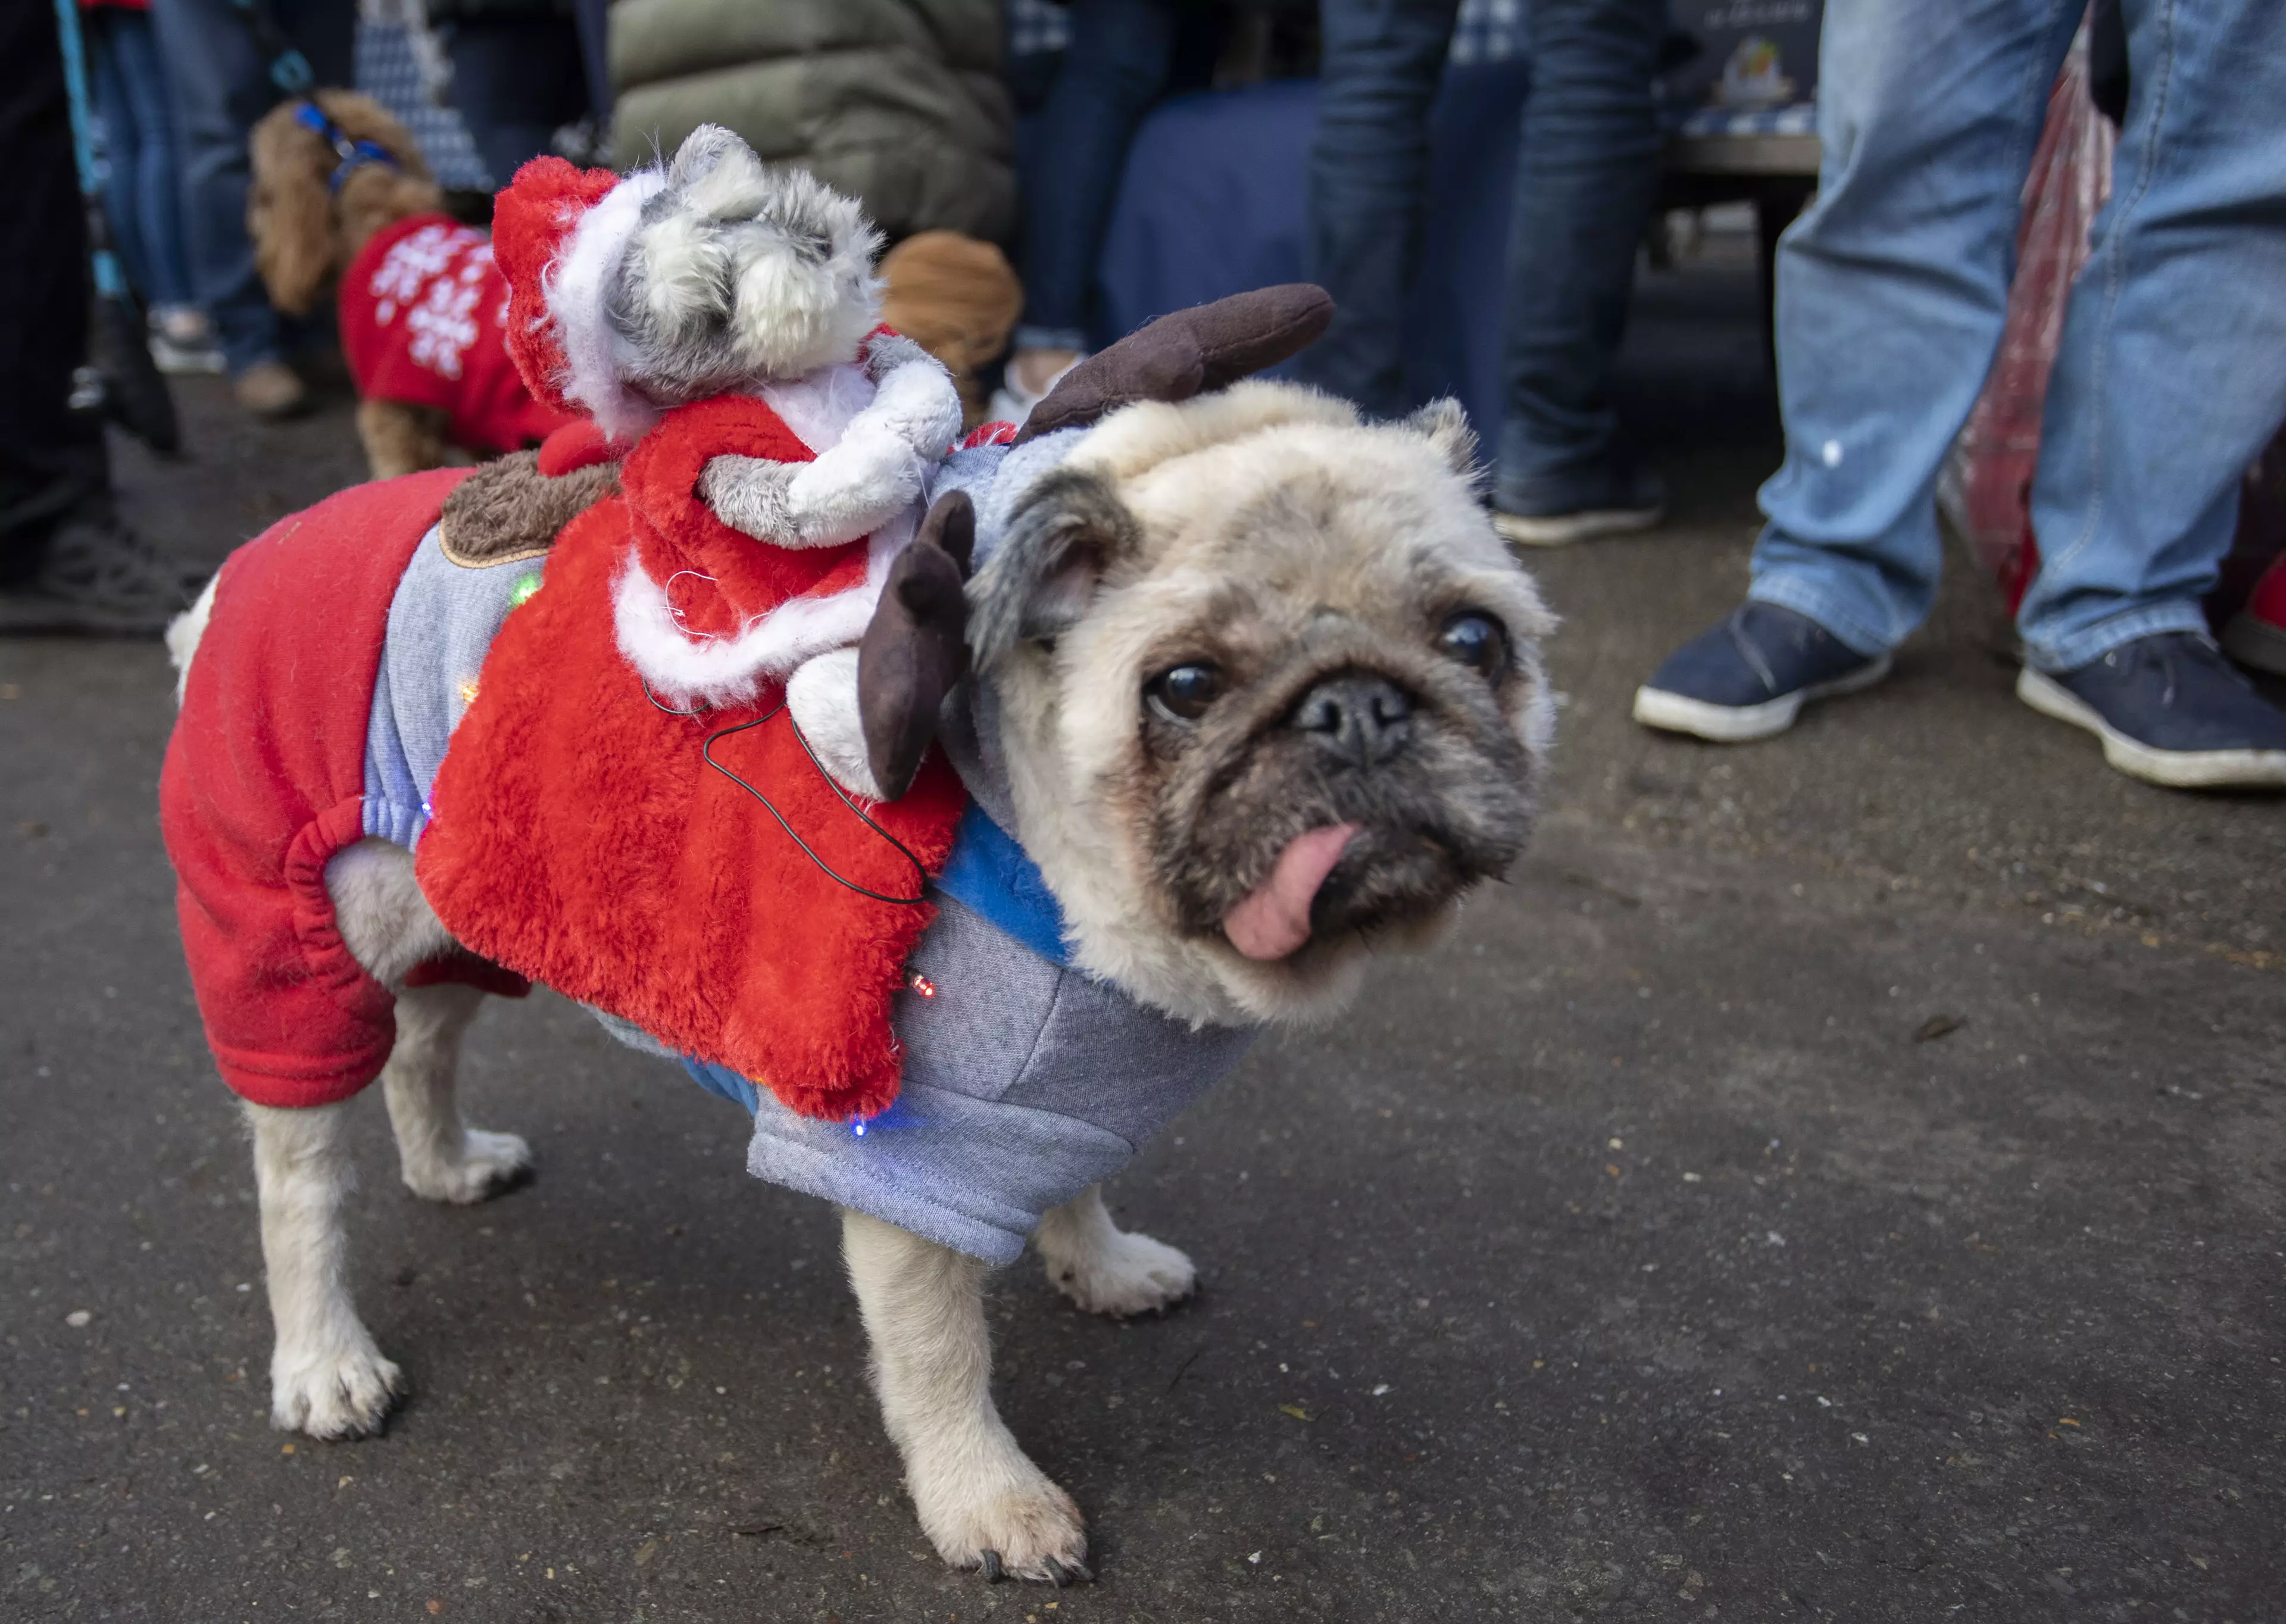 350 dogs and their owners came together in London (